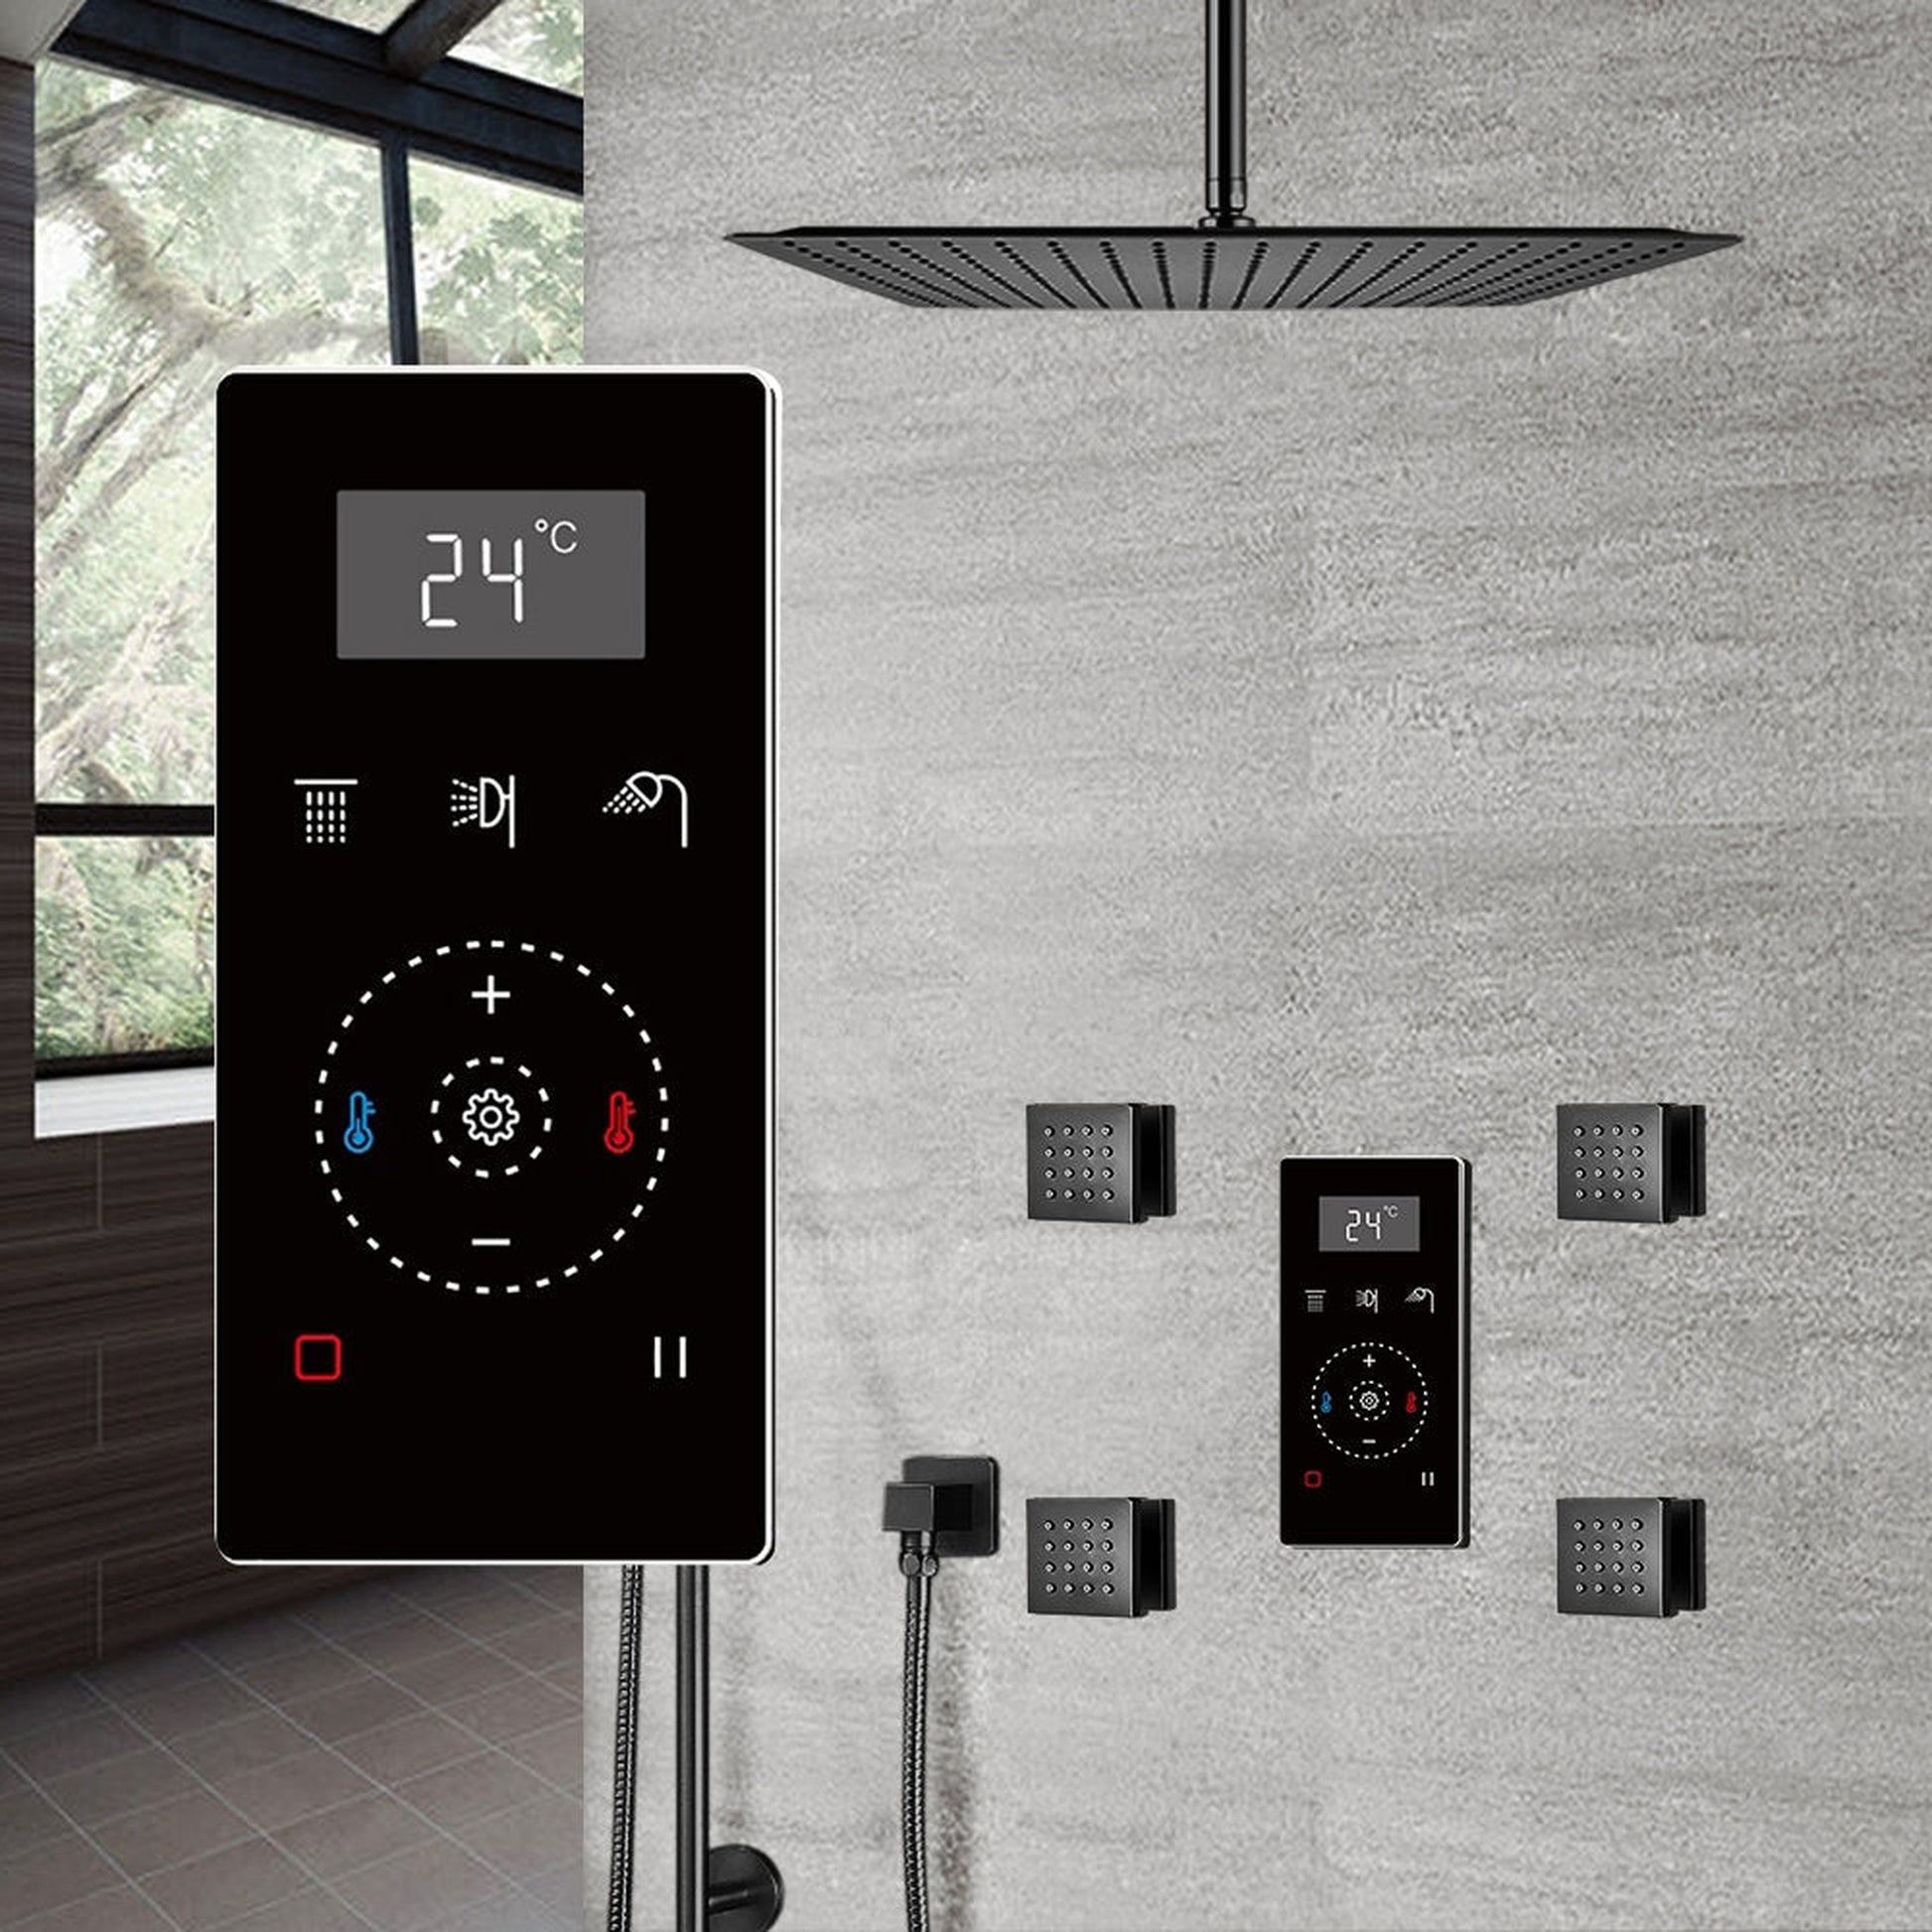 Fontana 8" Matte Black Ceiling Mounted Thermostatic Massage Shower Digital Touch Screen Shower Mixer Display 3-Function Rainfall Shower System With Hand Shower and 4-Jet Body Sprays